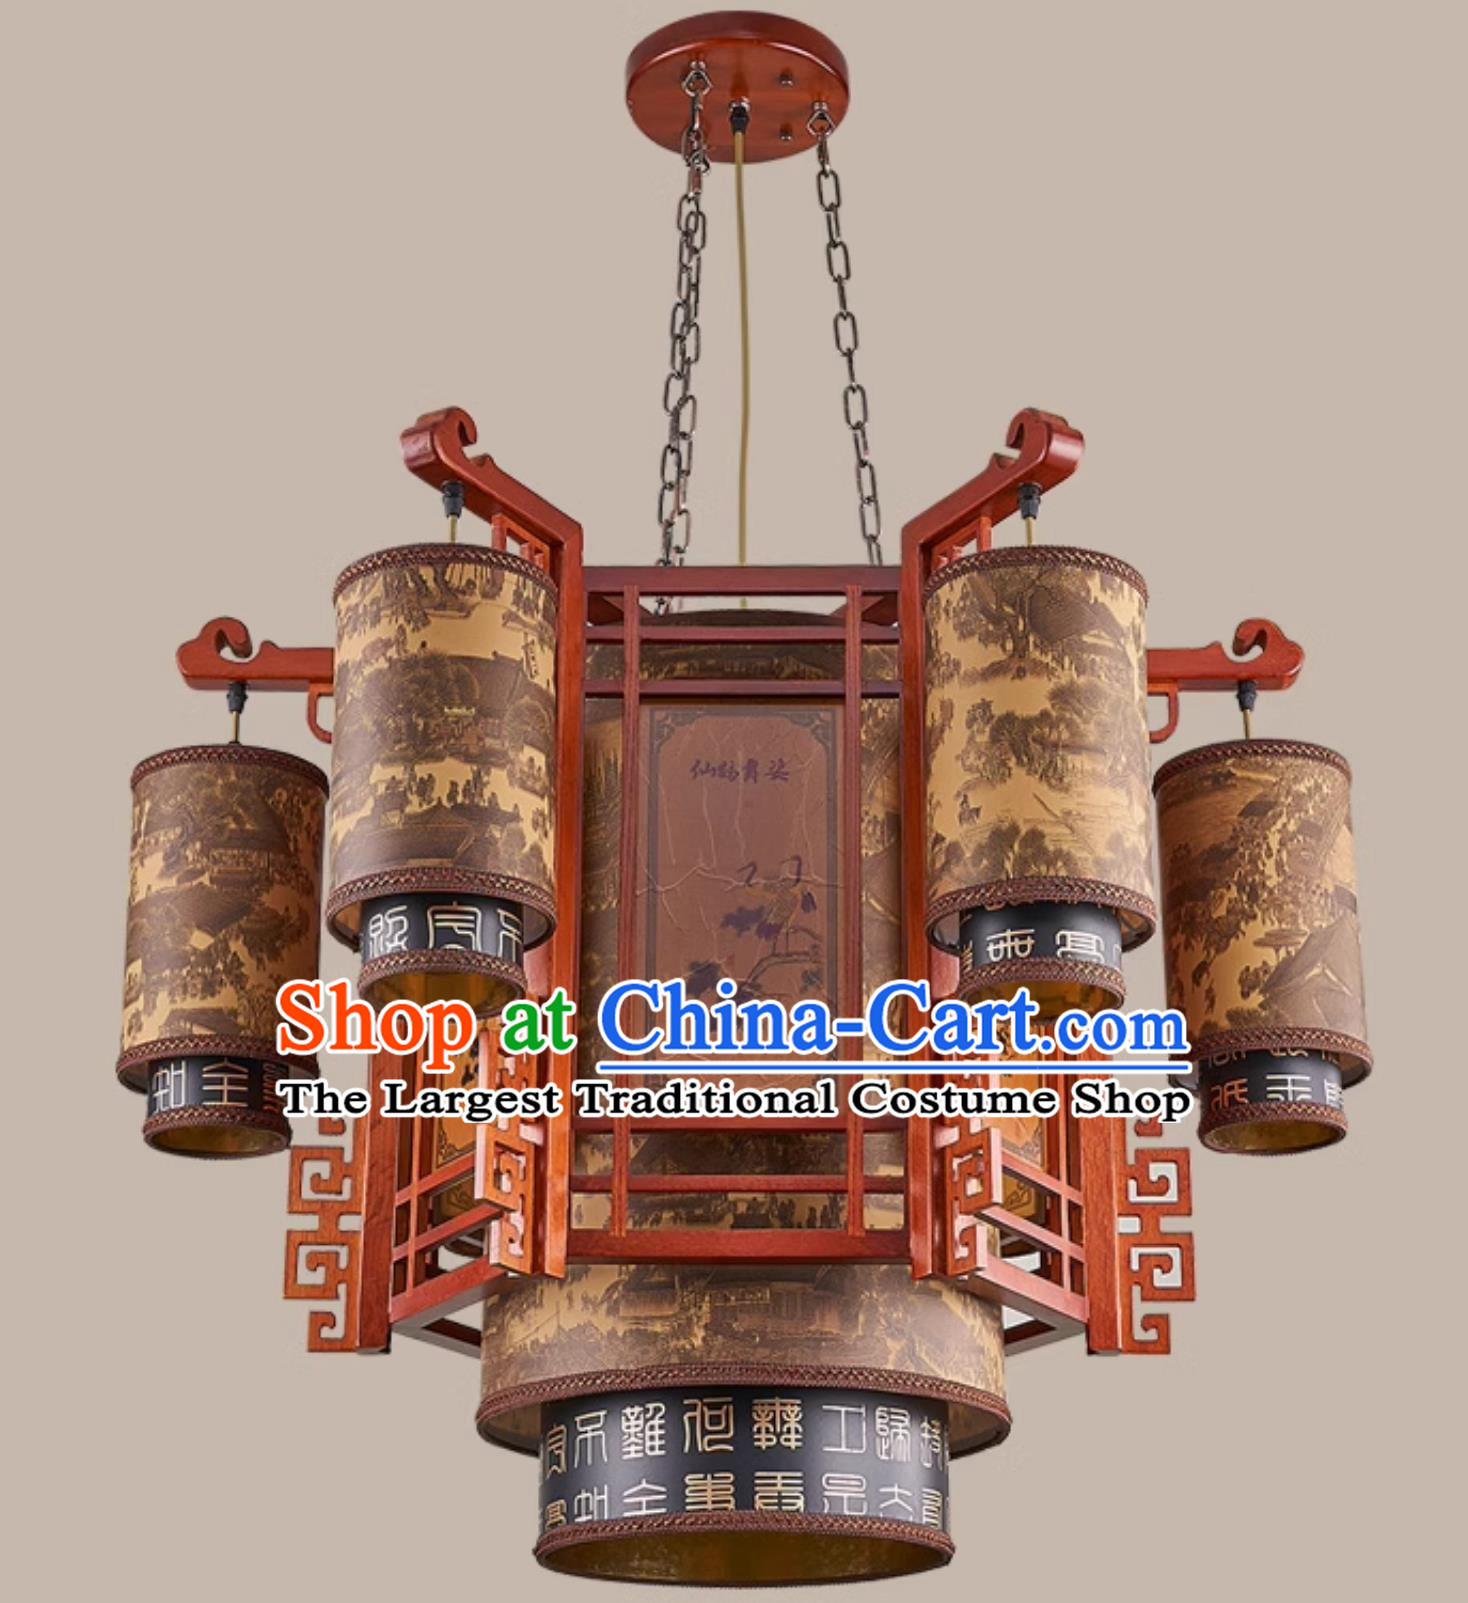 34 Inches Diameter Antique Chinese Chandelier Solid Wood Lantern Villa Tea House Headlight Hotel Chinese Style Palace Lantern